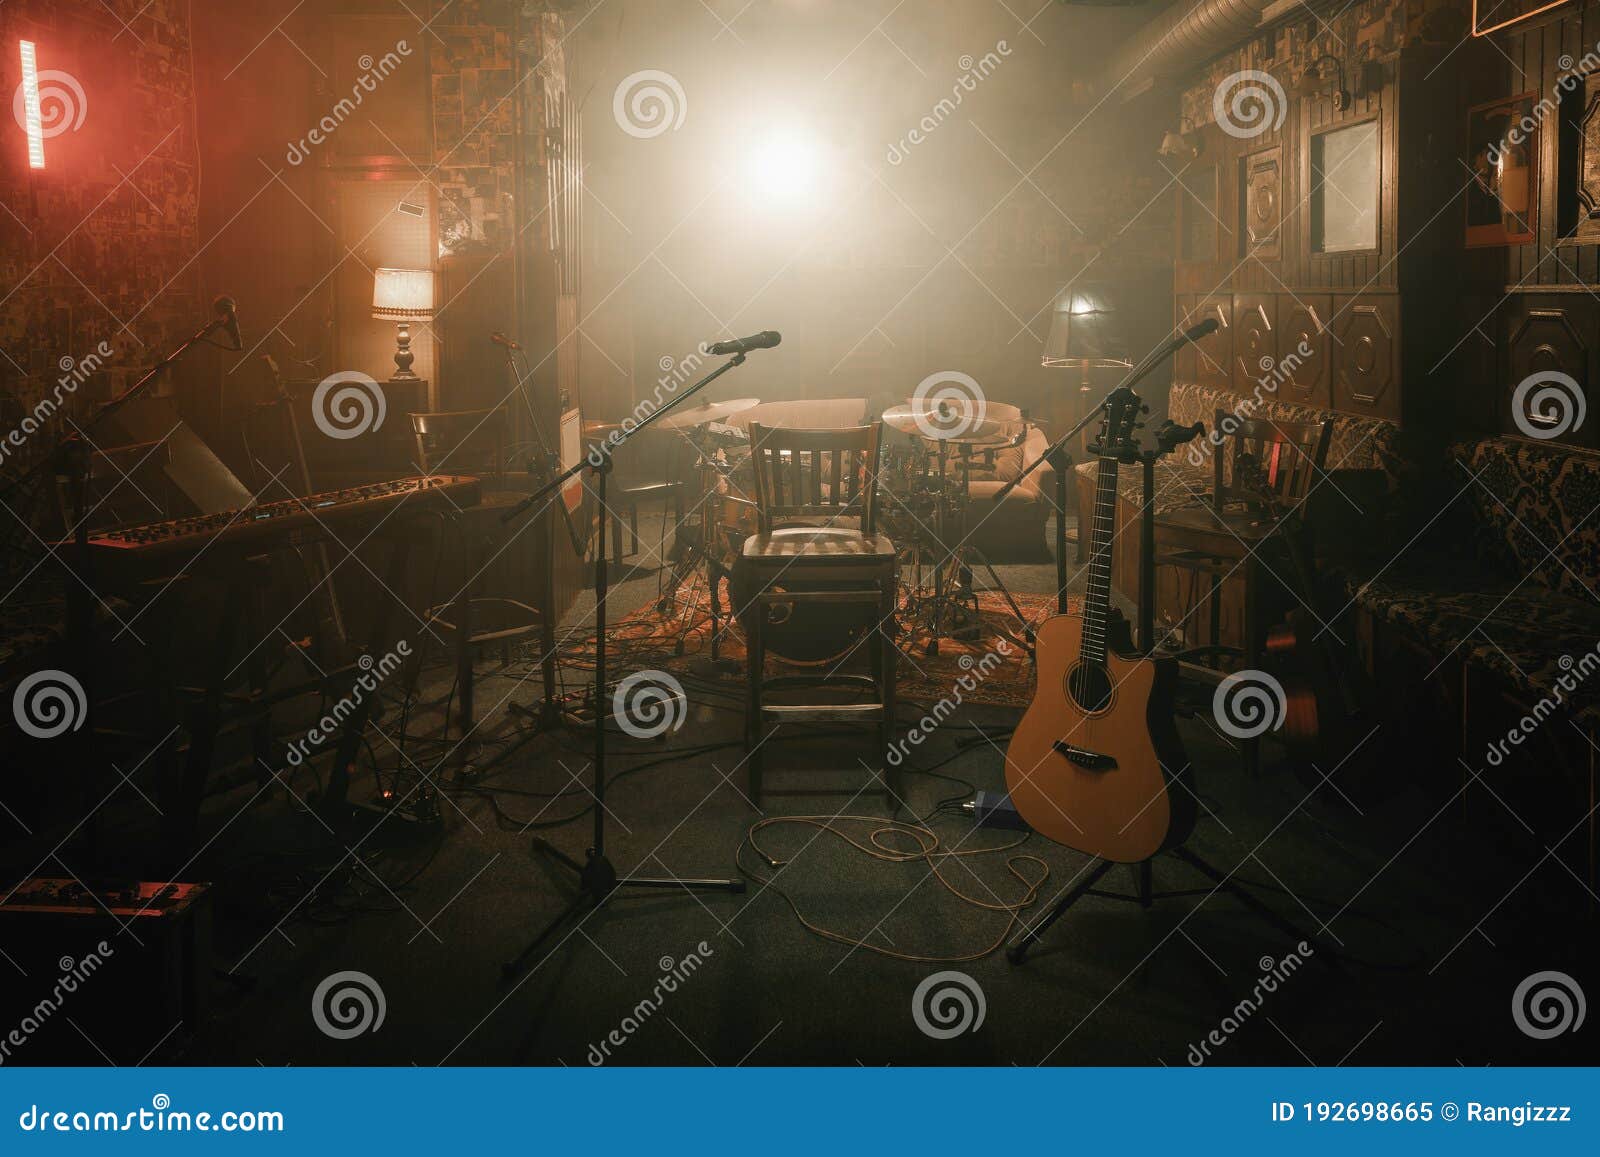 empty stage of a small unplugged live music concert